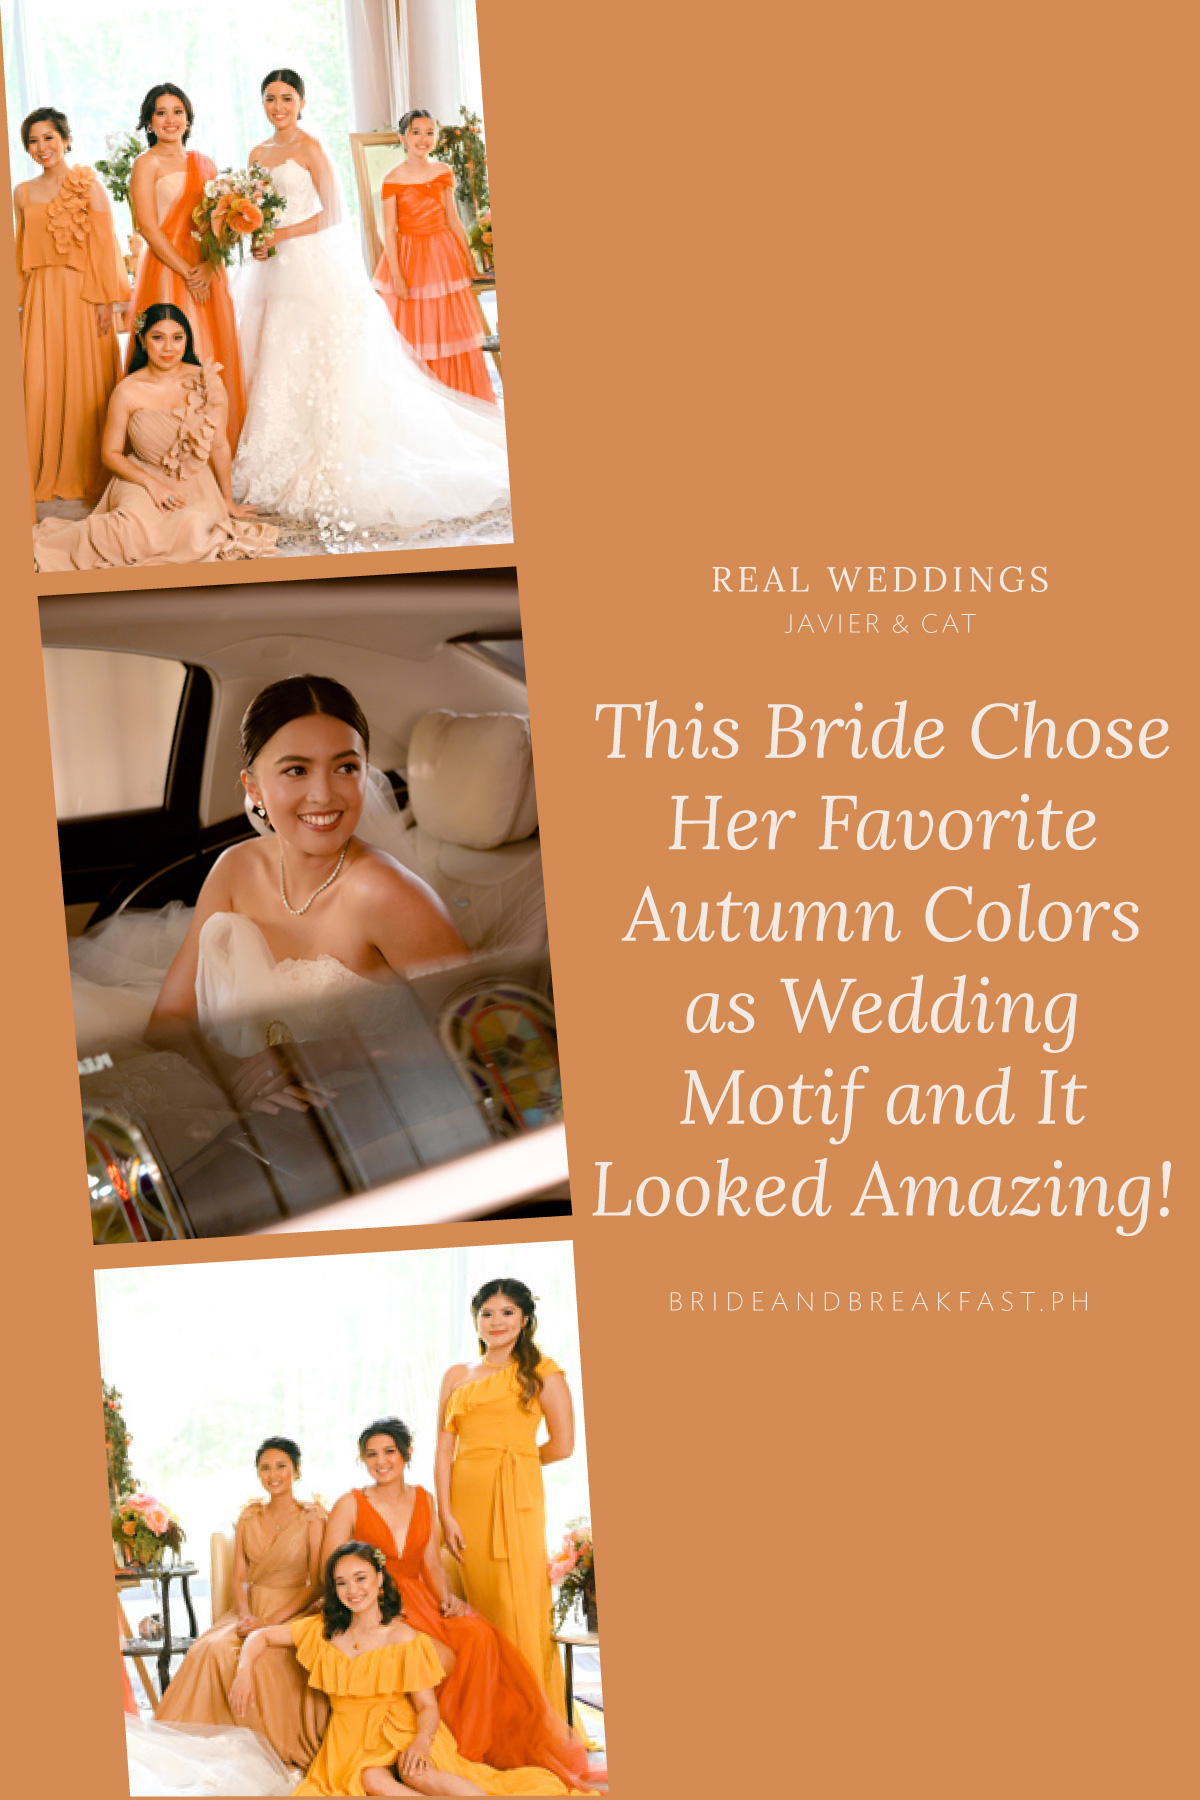 This Bride Chose Her Favorite Autumn Colors as Wedding Motif and It Looked Amazing!